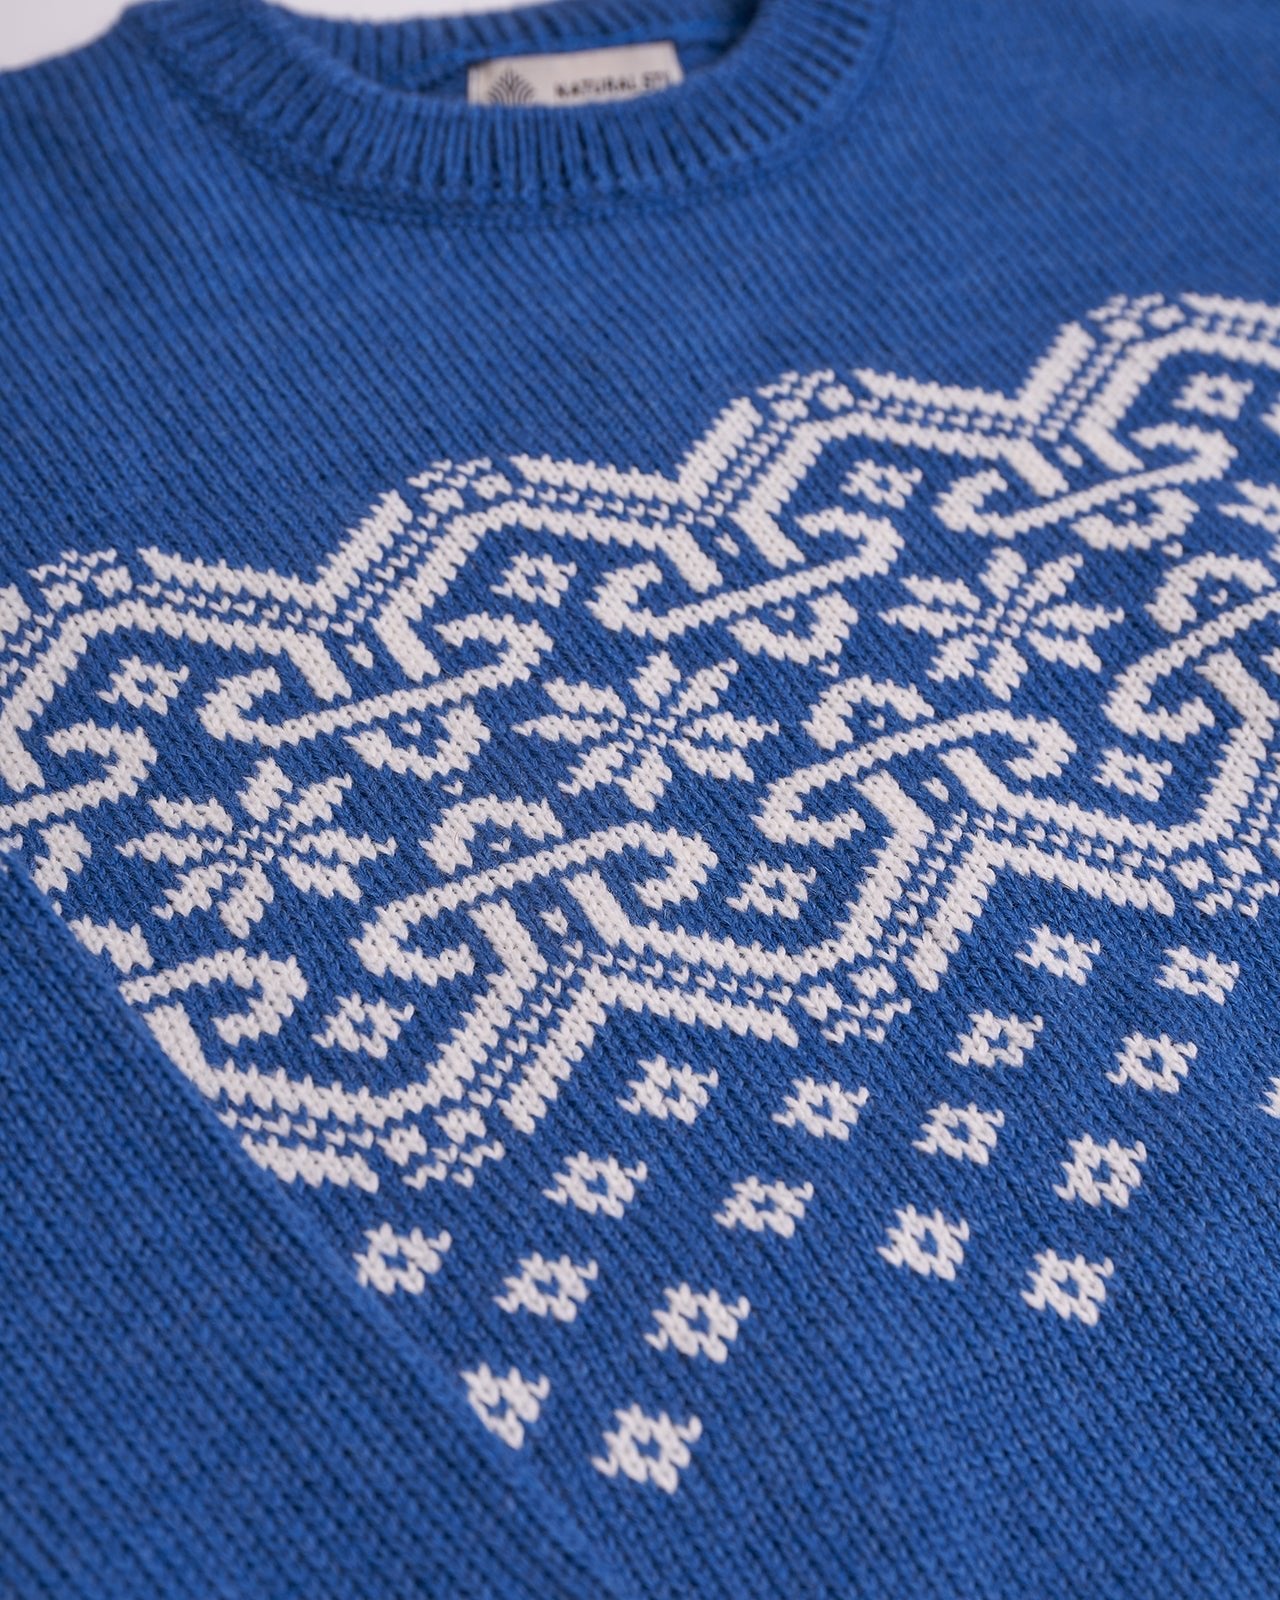 blue sweater with ornament